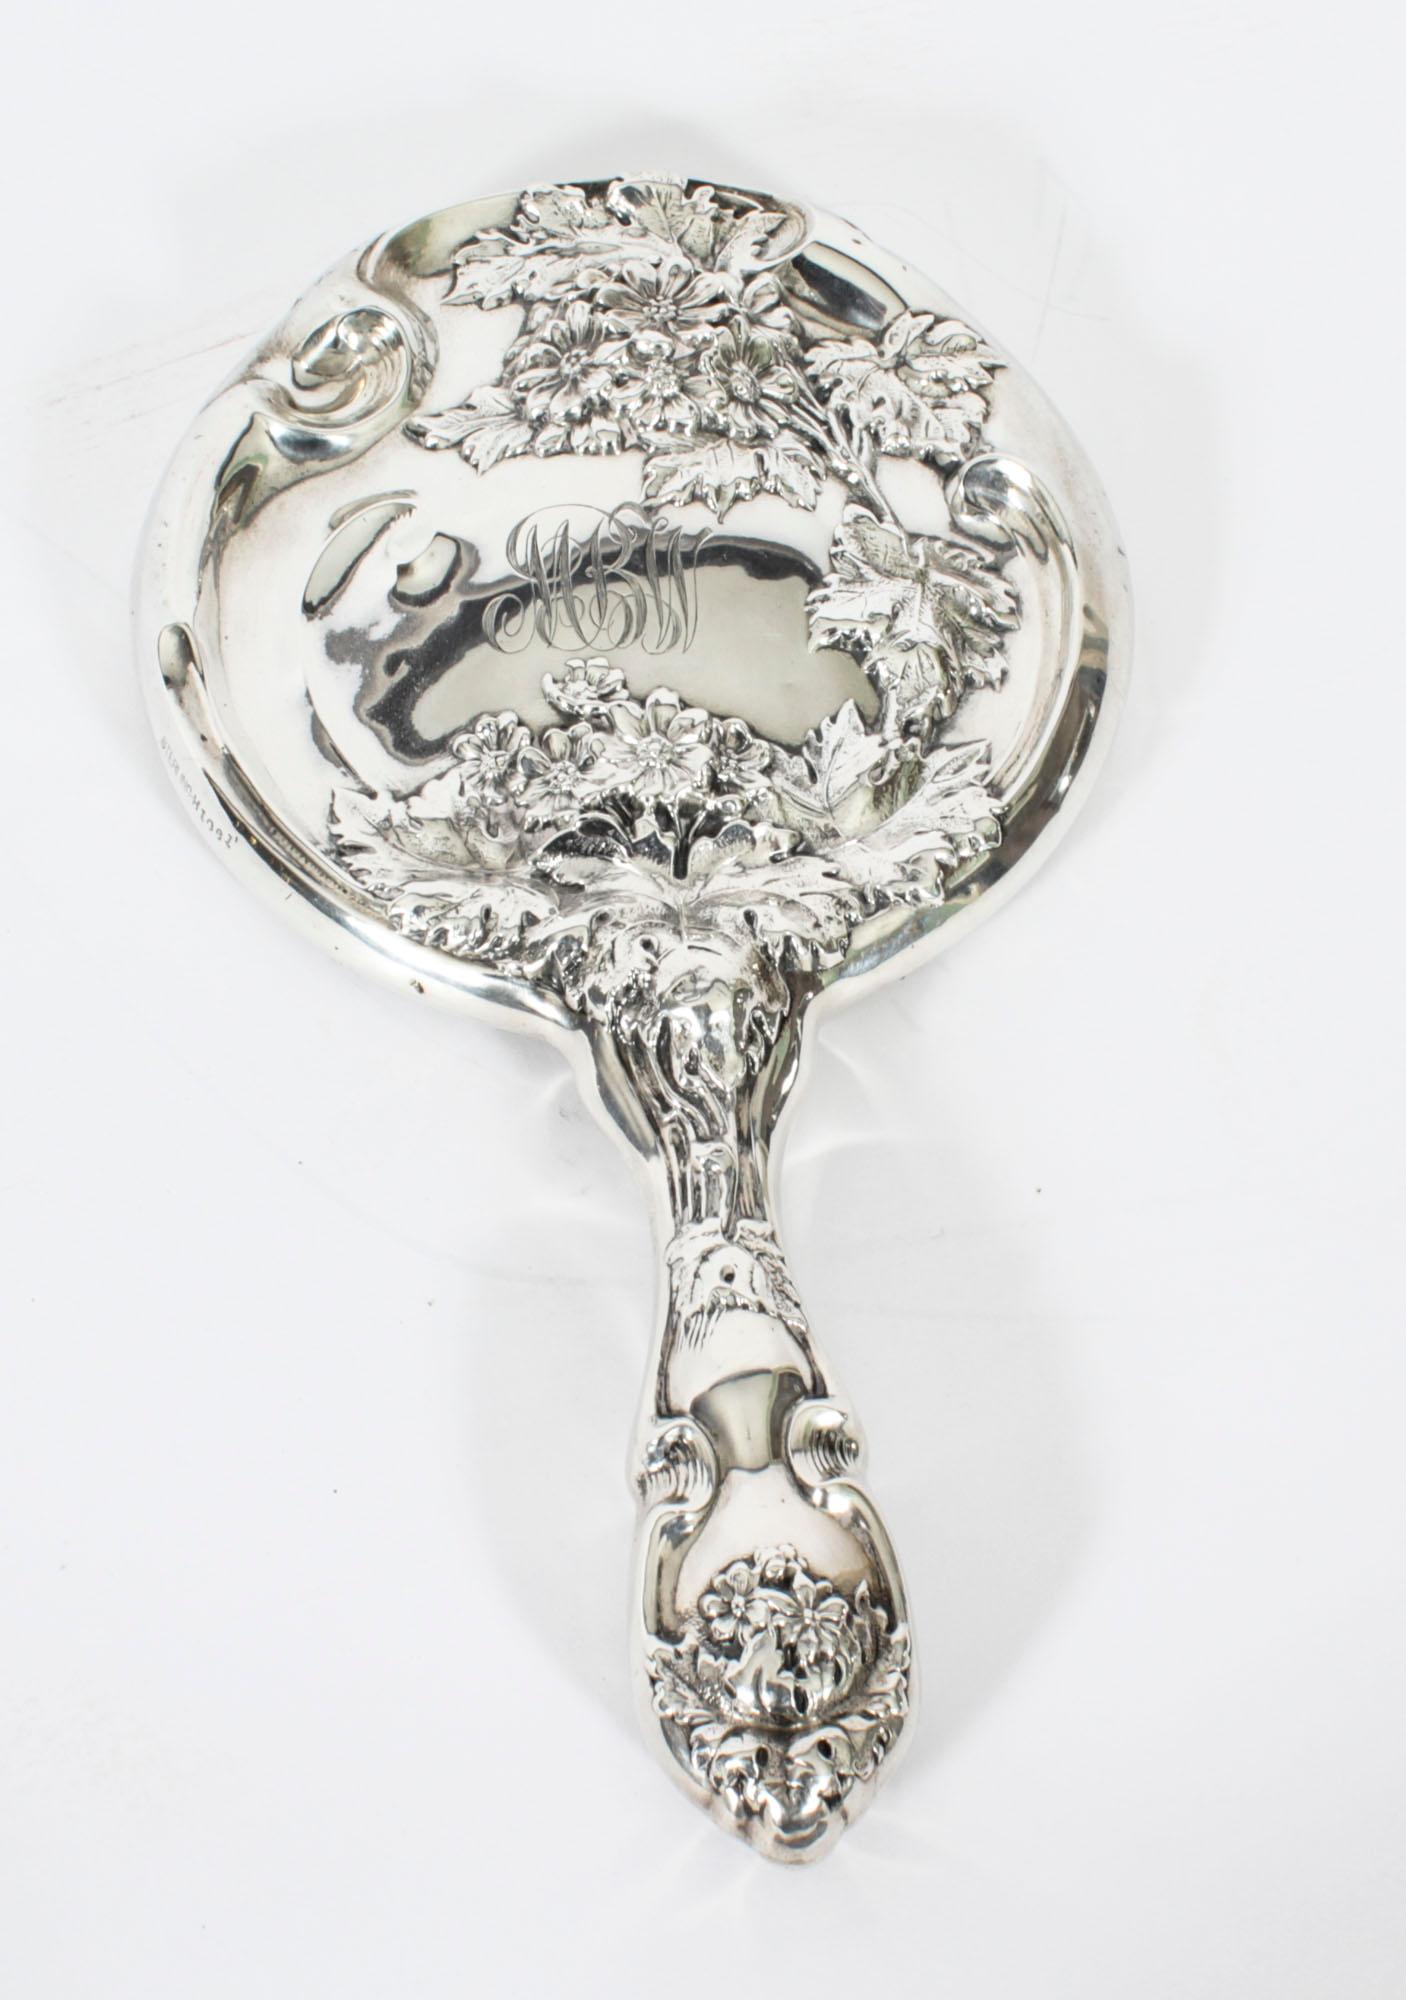 Antique French Art Nouveau Sterling Silver Hand Mirror 19th Century 9